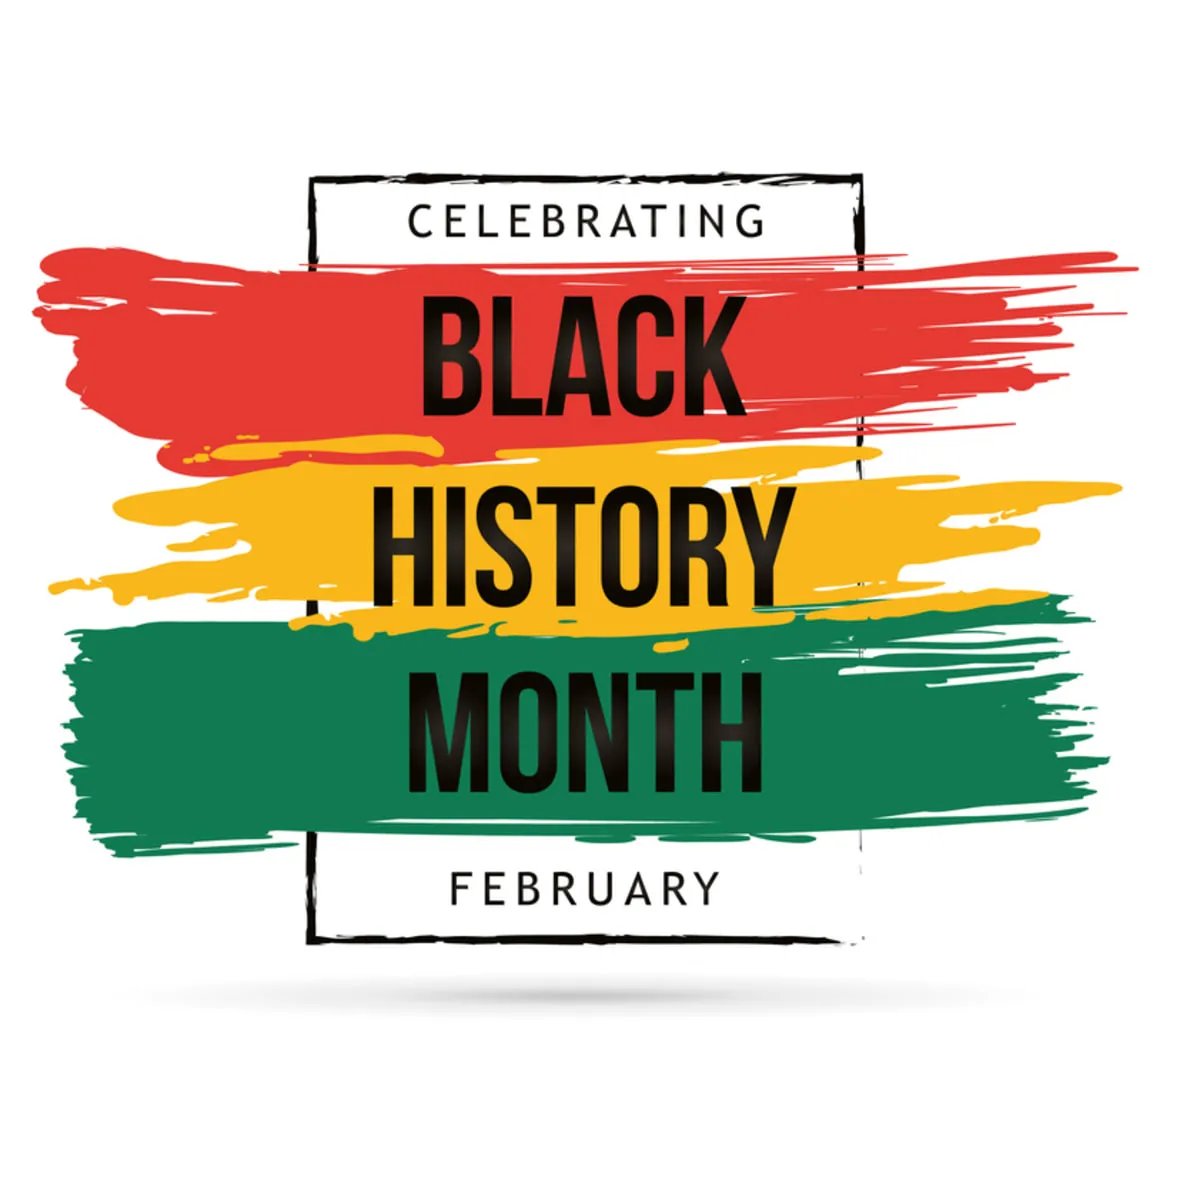 Where to find a Catholic Black History Month event (2023 edition)